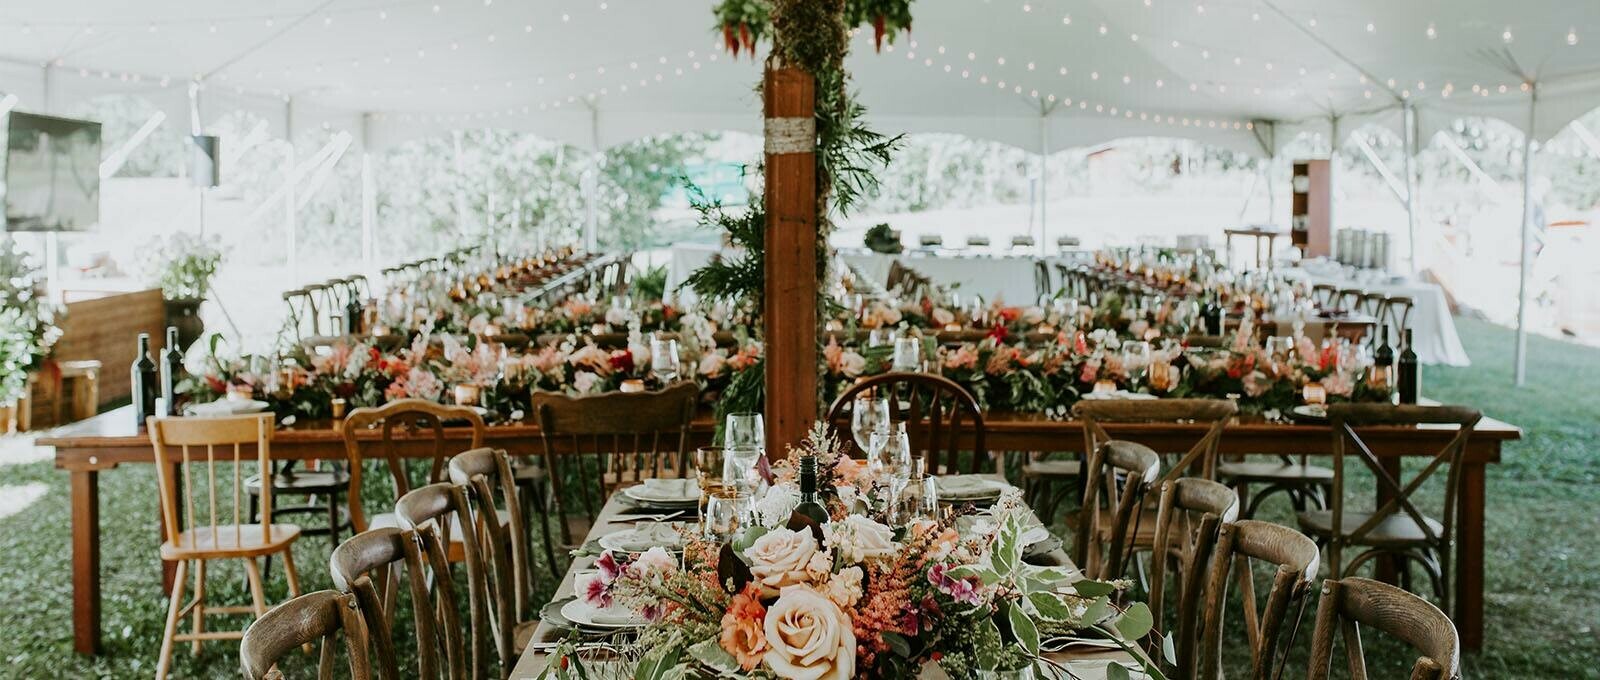 Special Event Rentals - Edmonton showcases vineyard chairs and tables, glassware, tableware, and tablecloths under a big pole tent